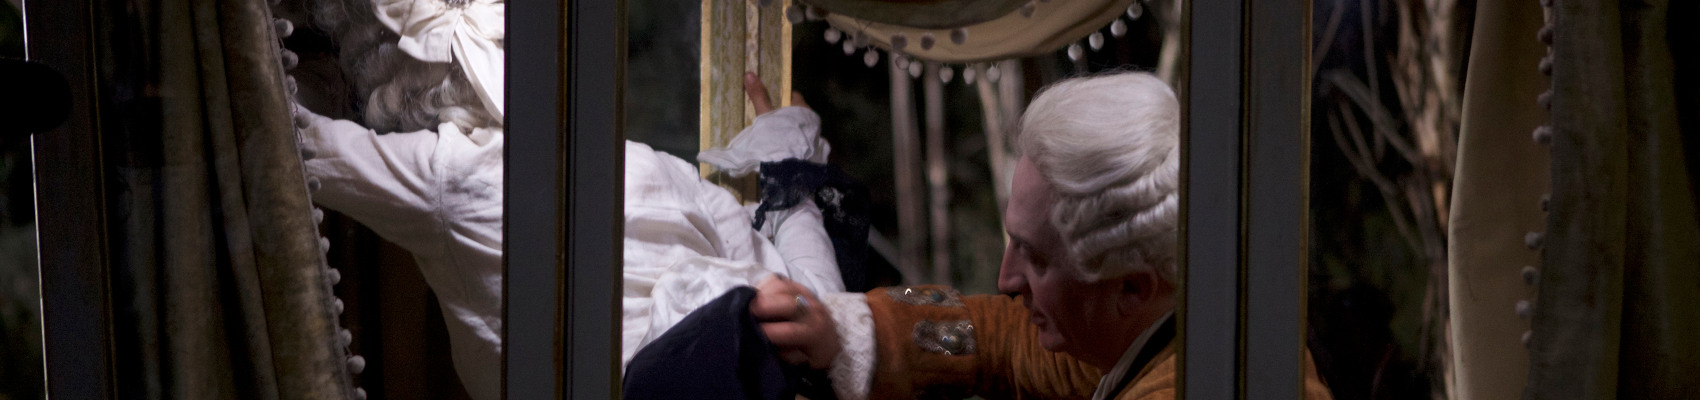 A man in a white wig and 18th century costume lifting up the skirt of a woman who is facing away. She is waring a similar wig. The image is a cropped version of a film still of Théodora Marcadé and Marc Susini in Albert Serra's LIBERTE. Original image Courtesy of Cinema Guild.